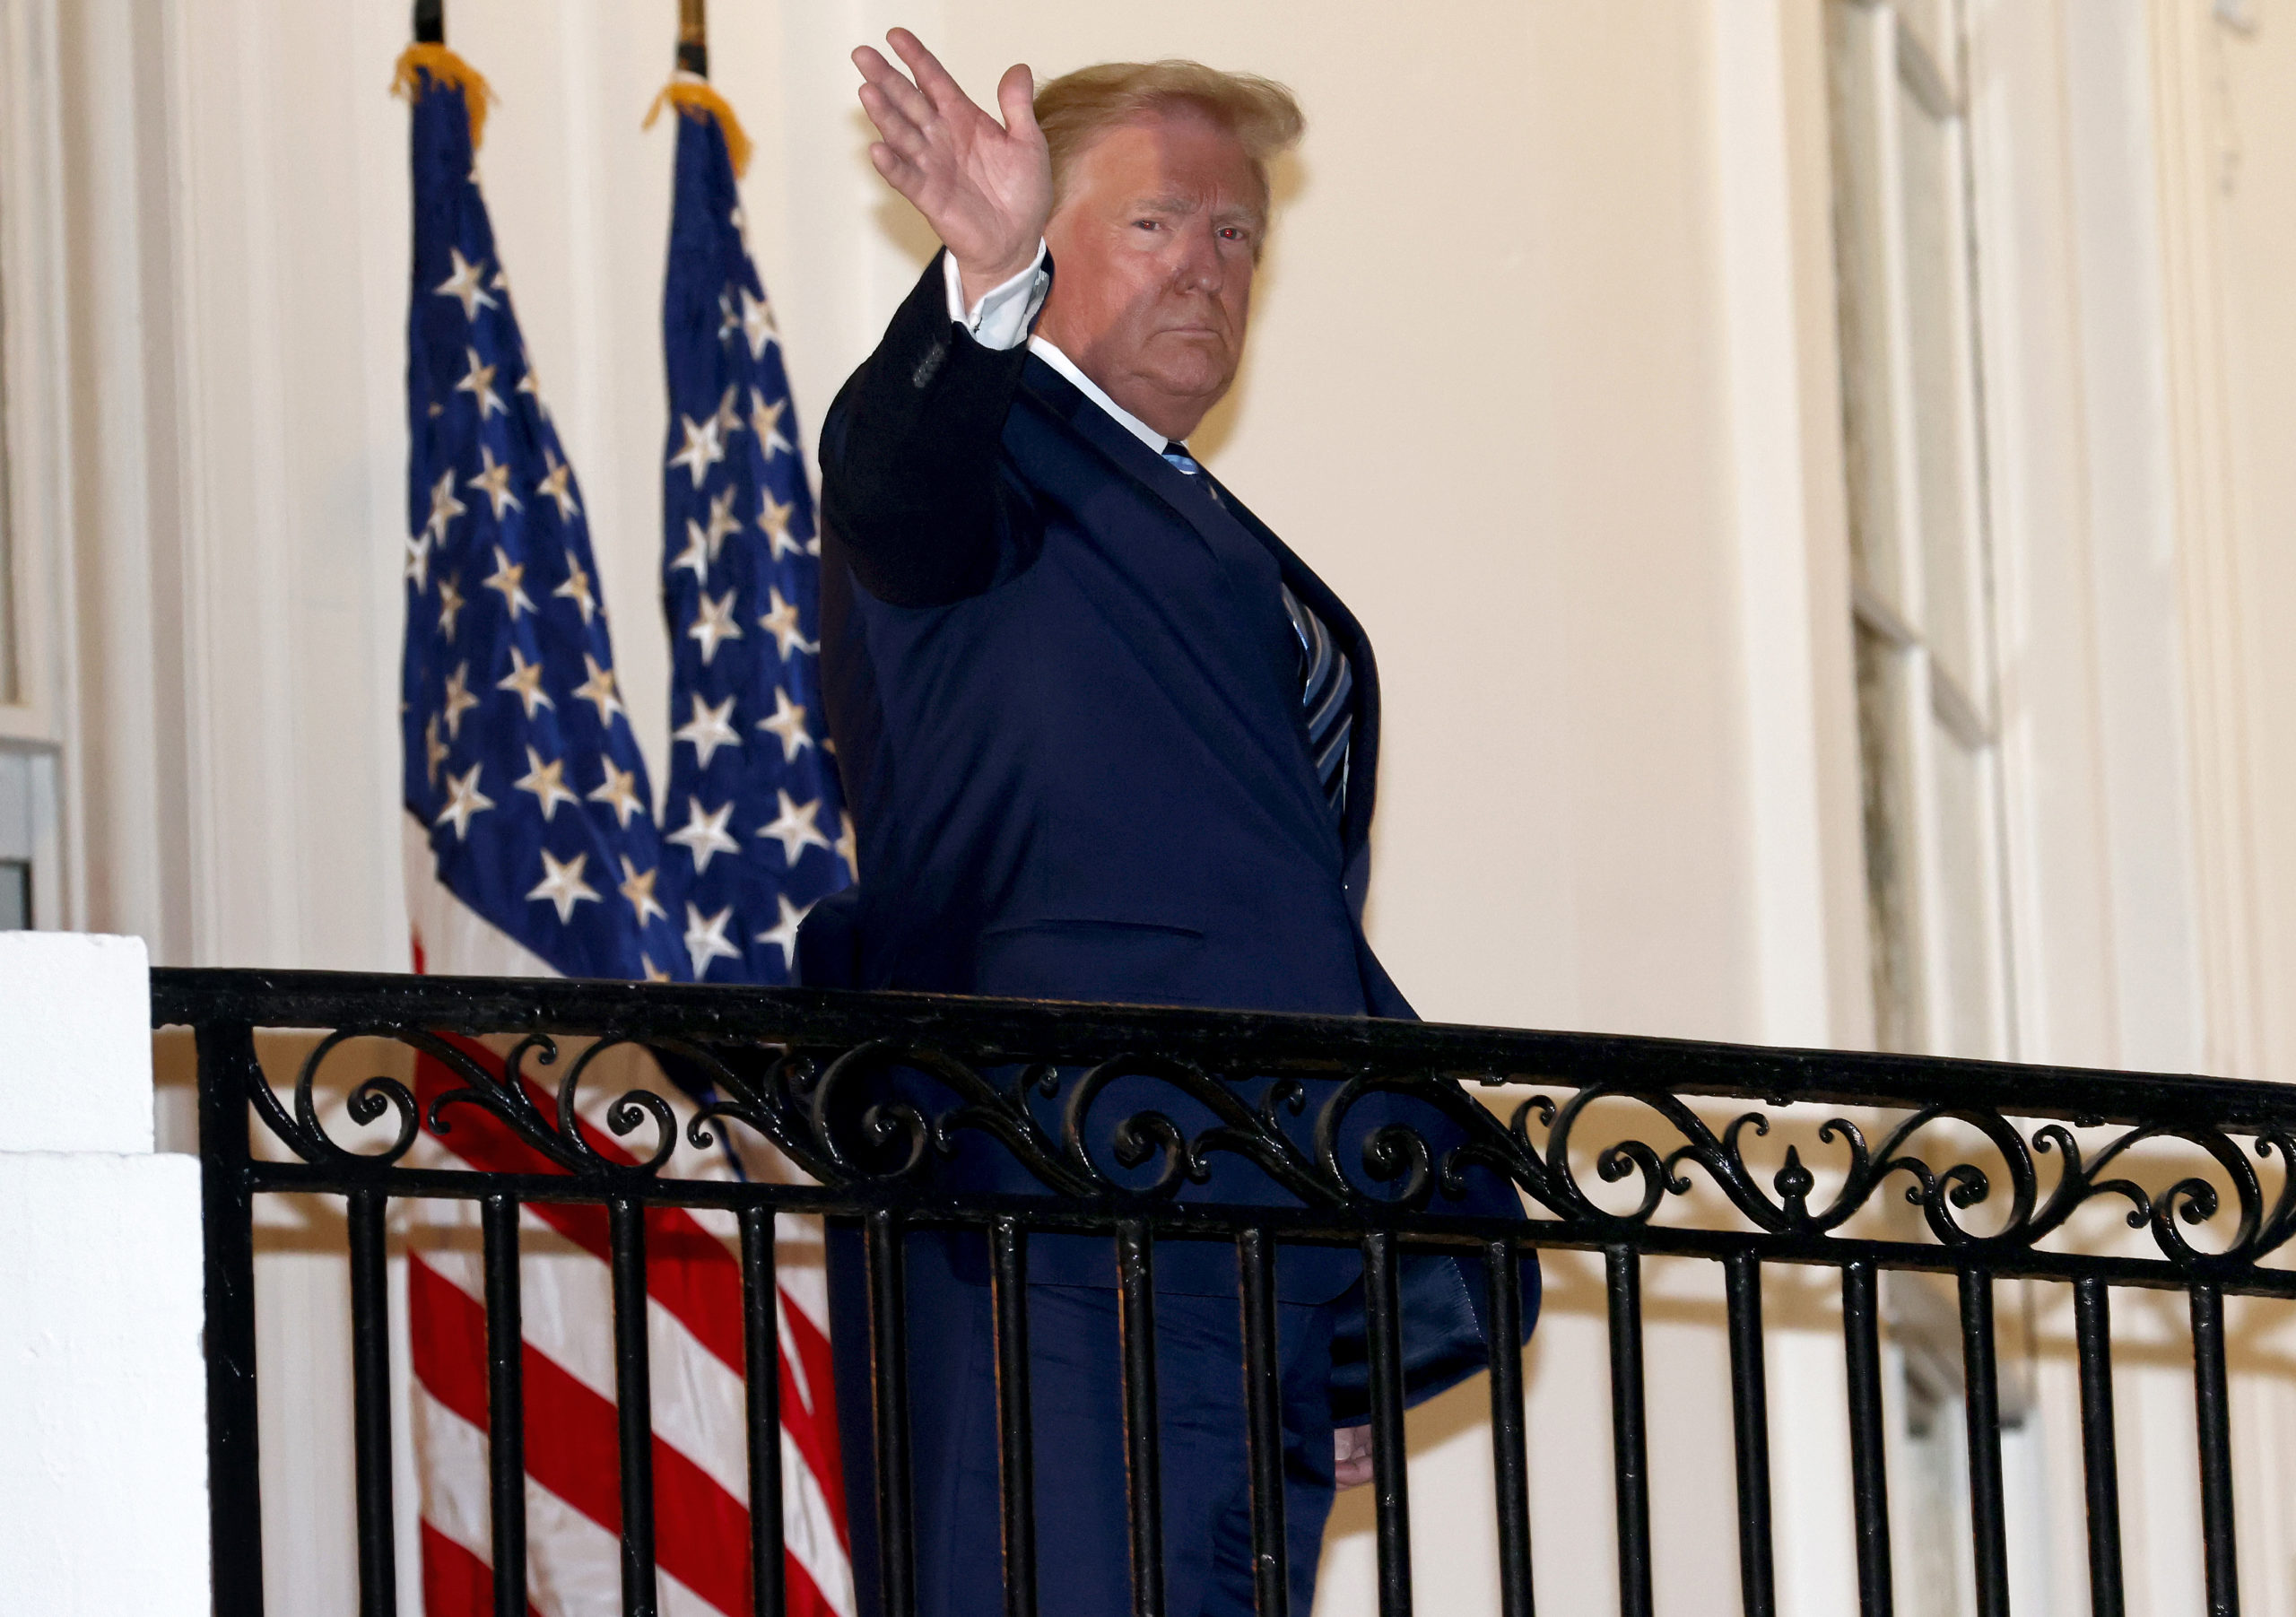 WASHINGTON, DC - OCTOBER 05: U.S. President Donald Trump waves upon return to the White House from Walter Reed National Military Medical Center on October 05, 2020 in Washington, DC. Trump spent three days hospitalized for coronavirus. (Photo by Win McNamee/Getty Images)